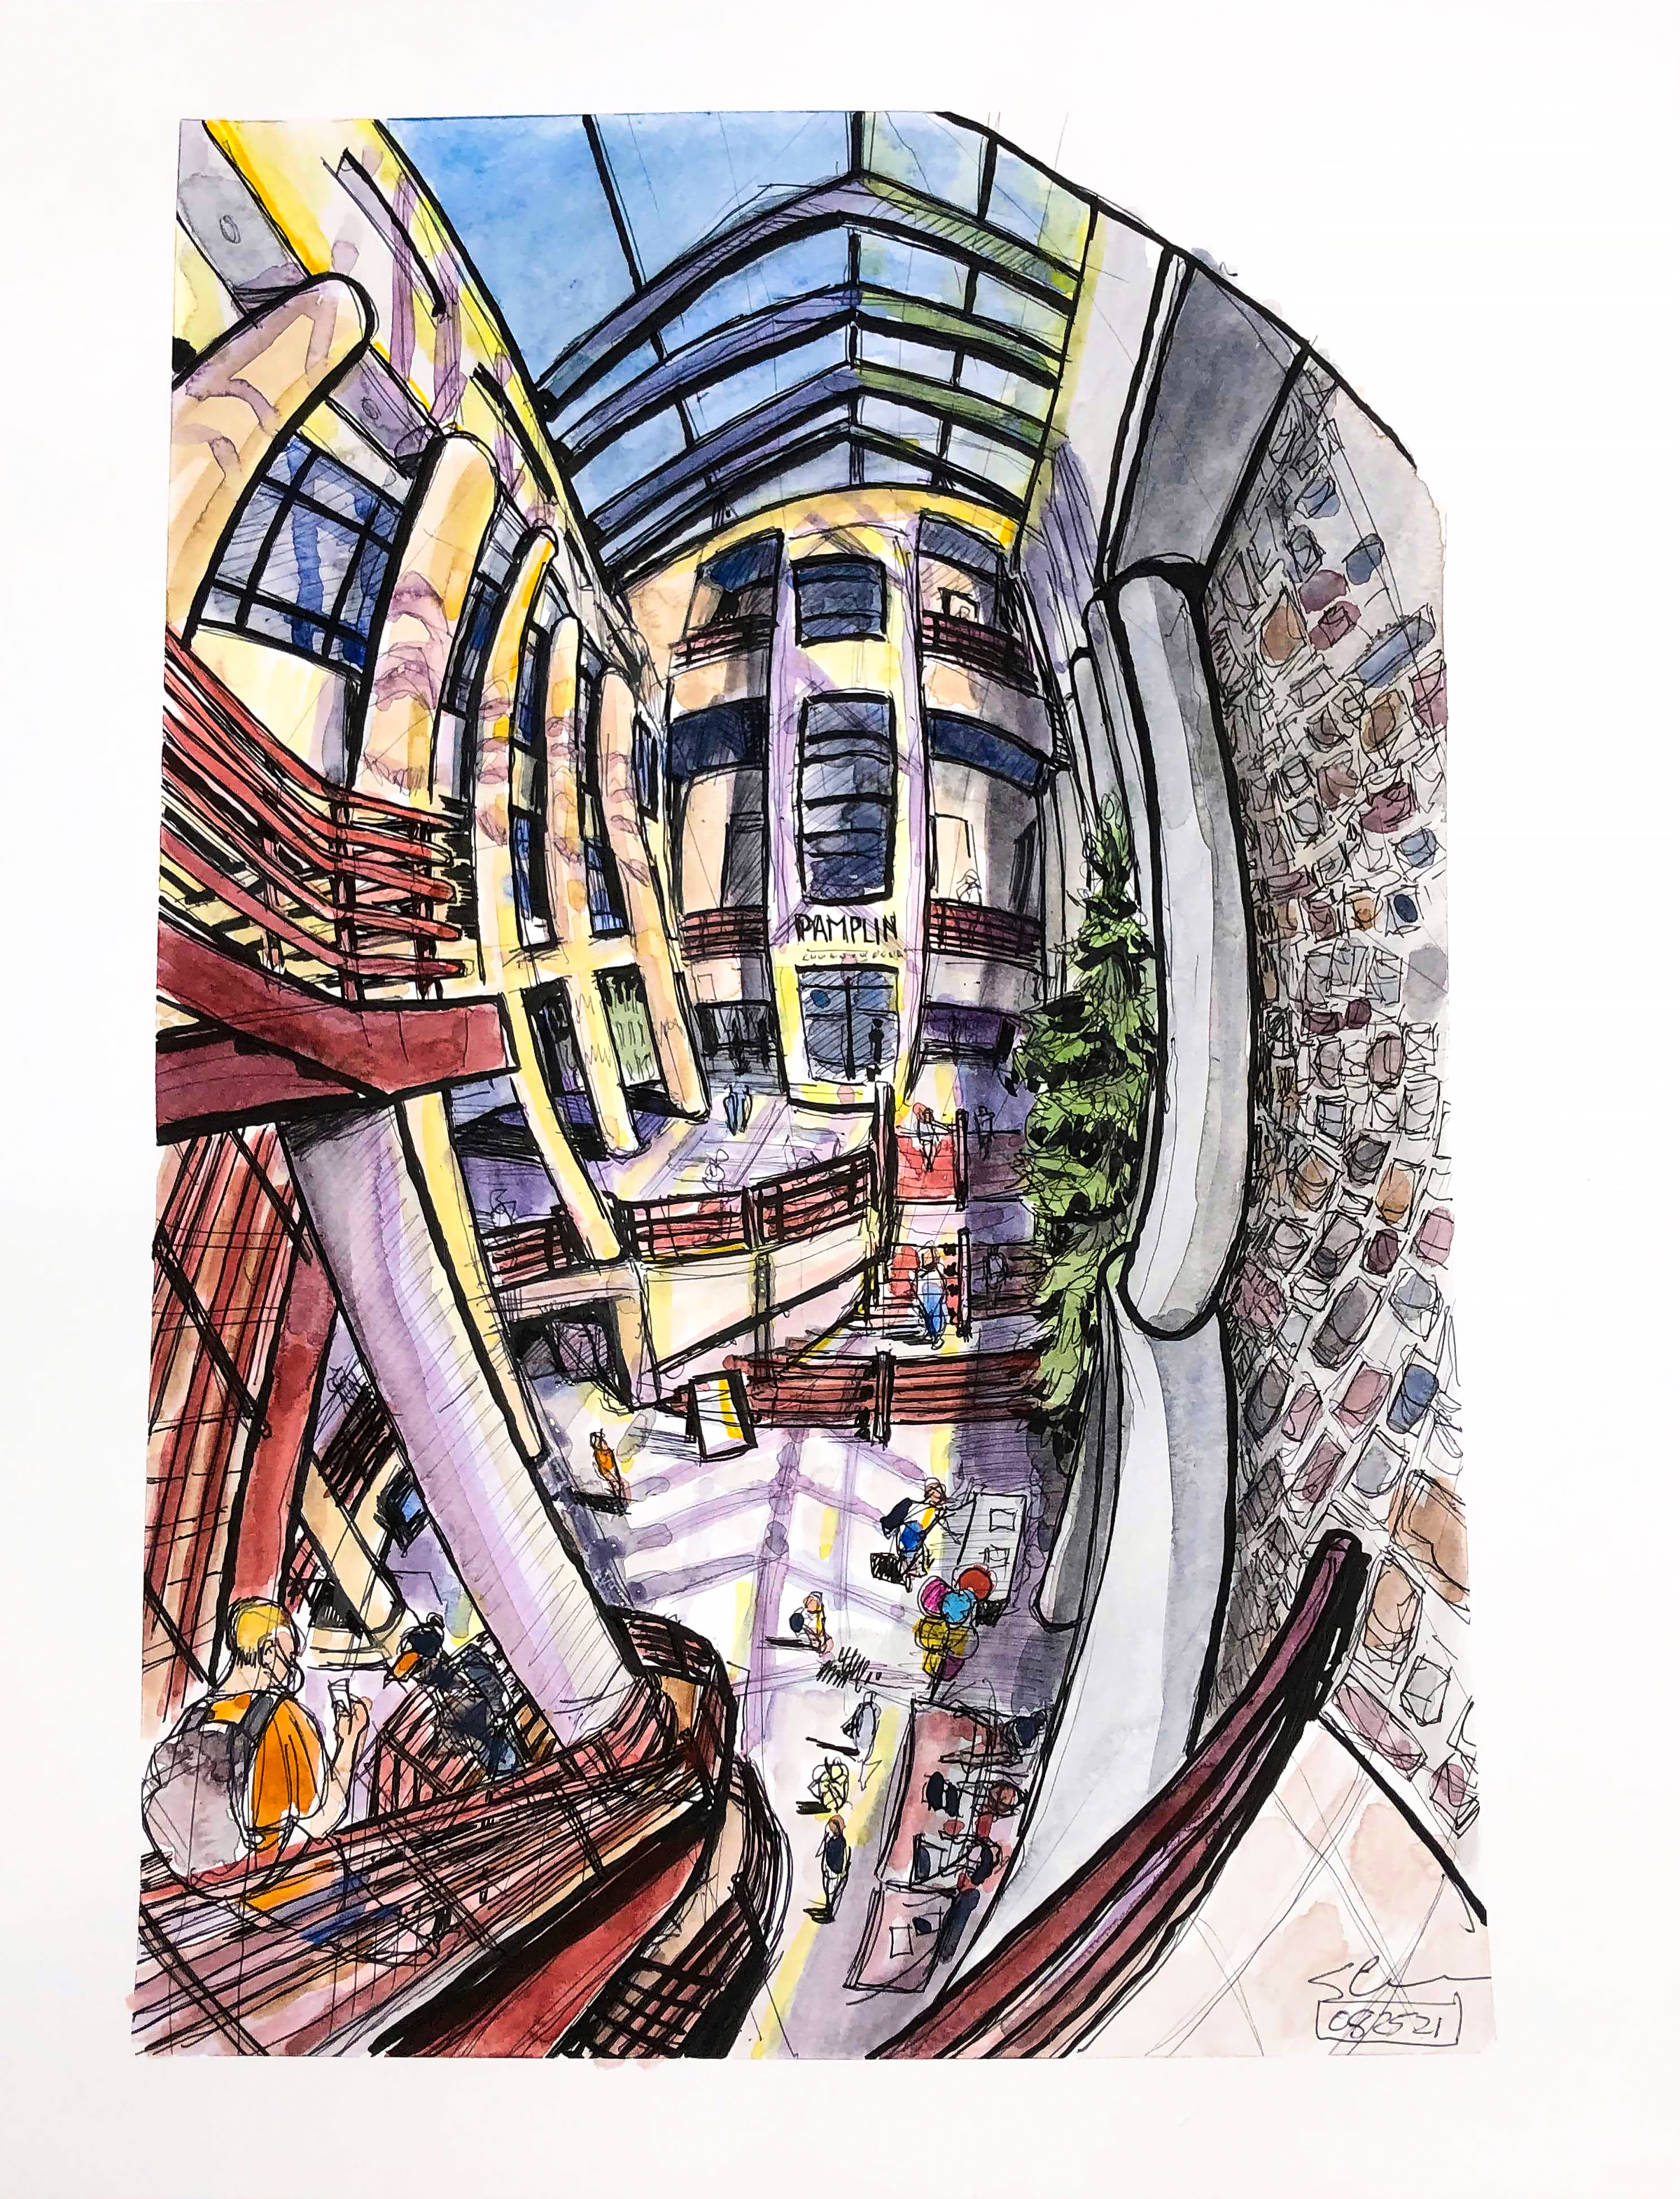 Ink and watercolor sketch of the Pamplin atrium